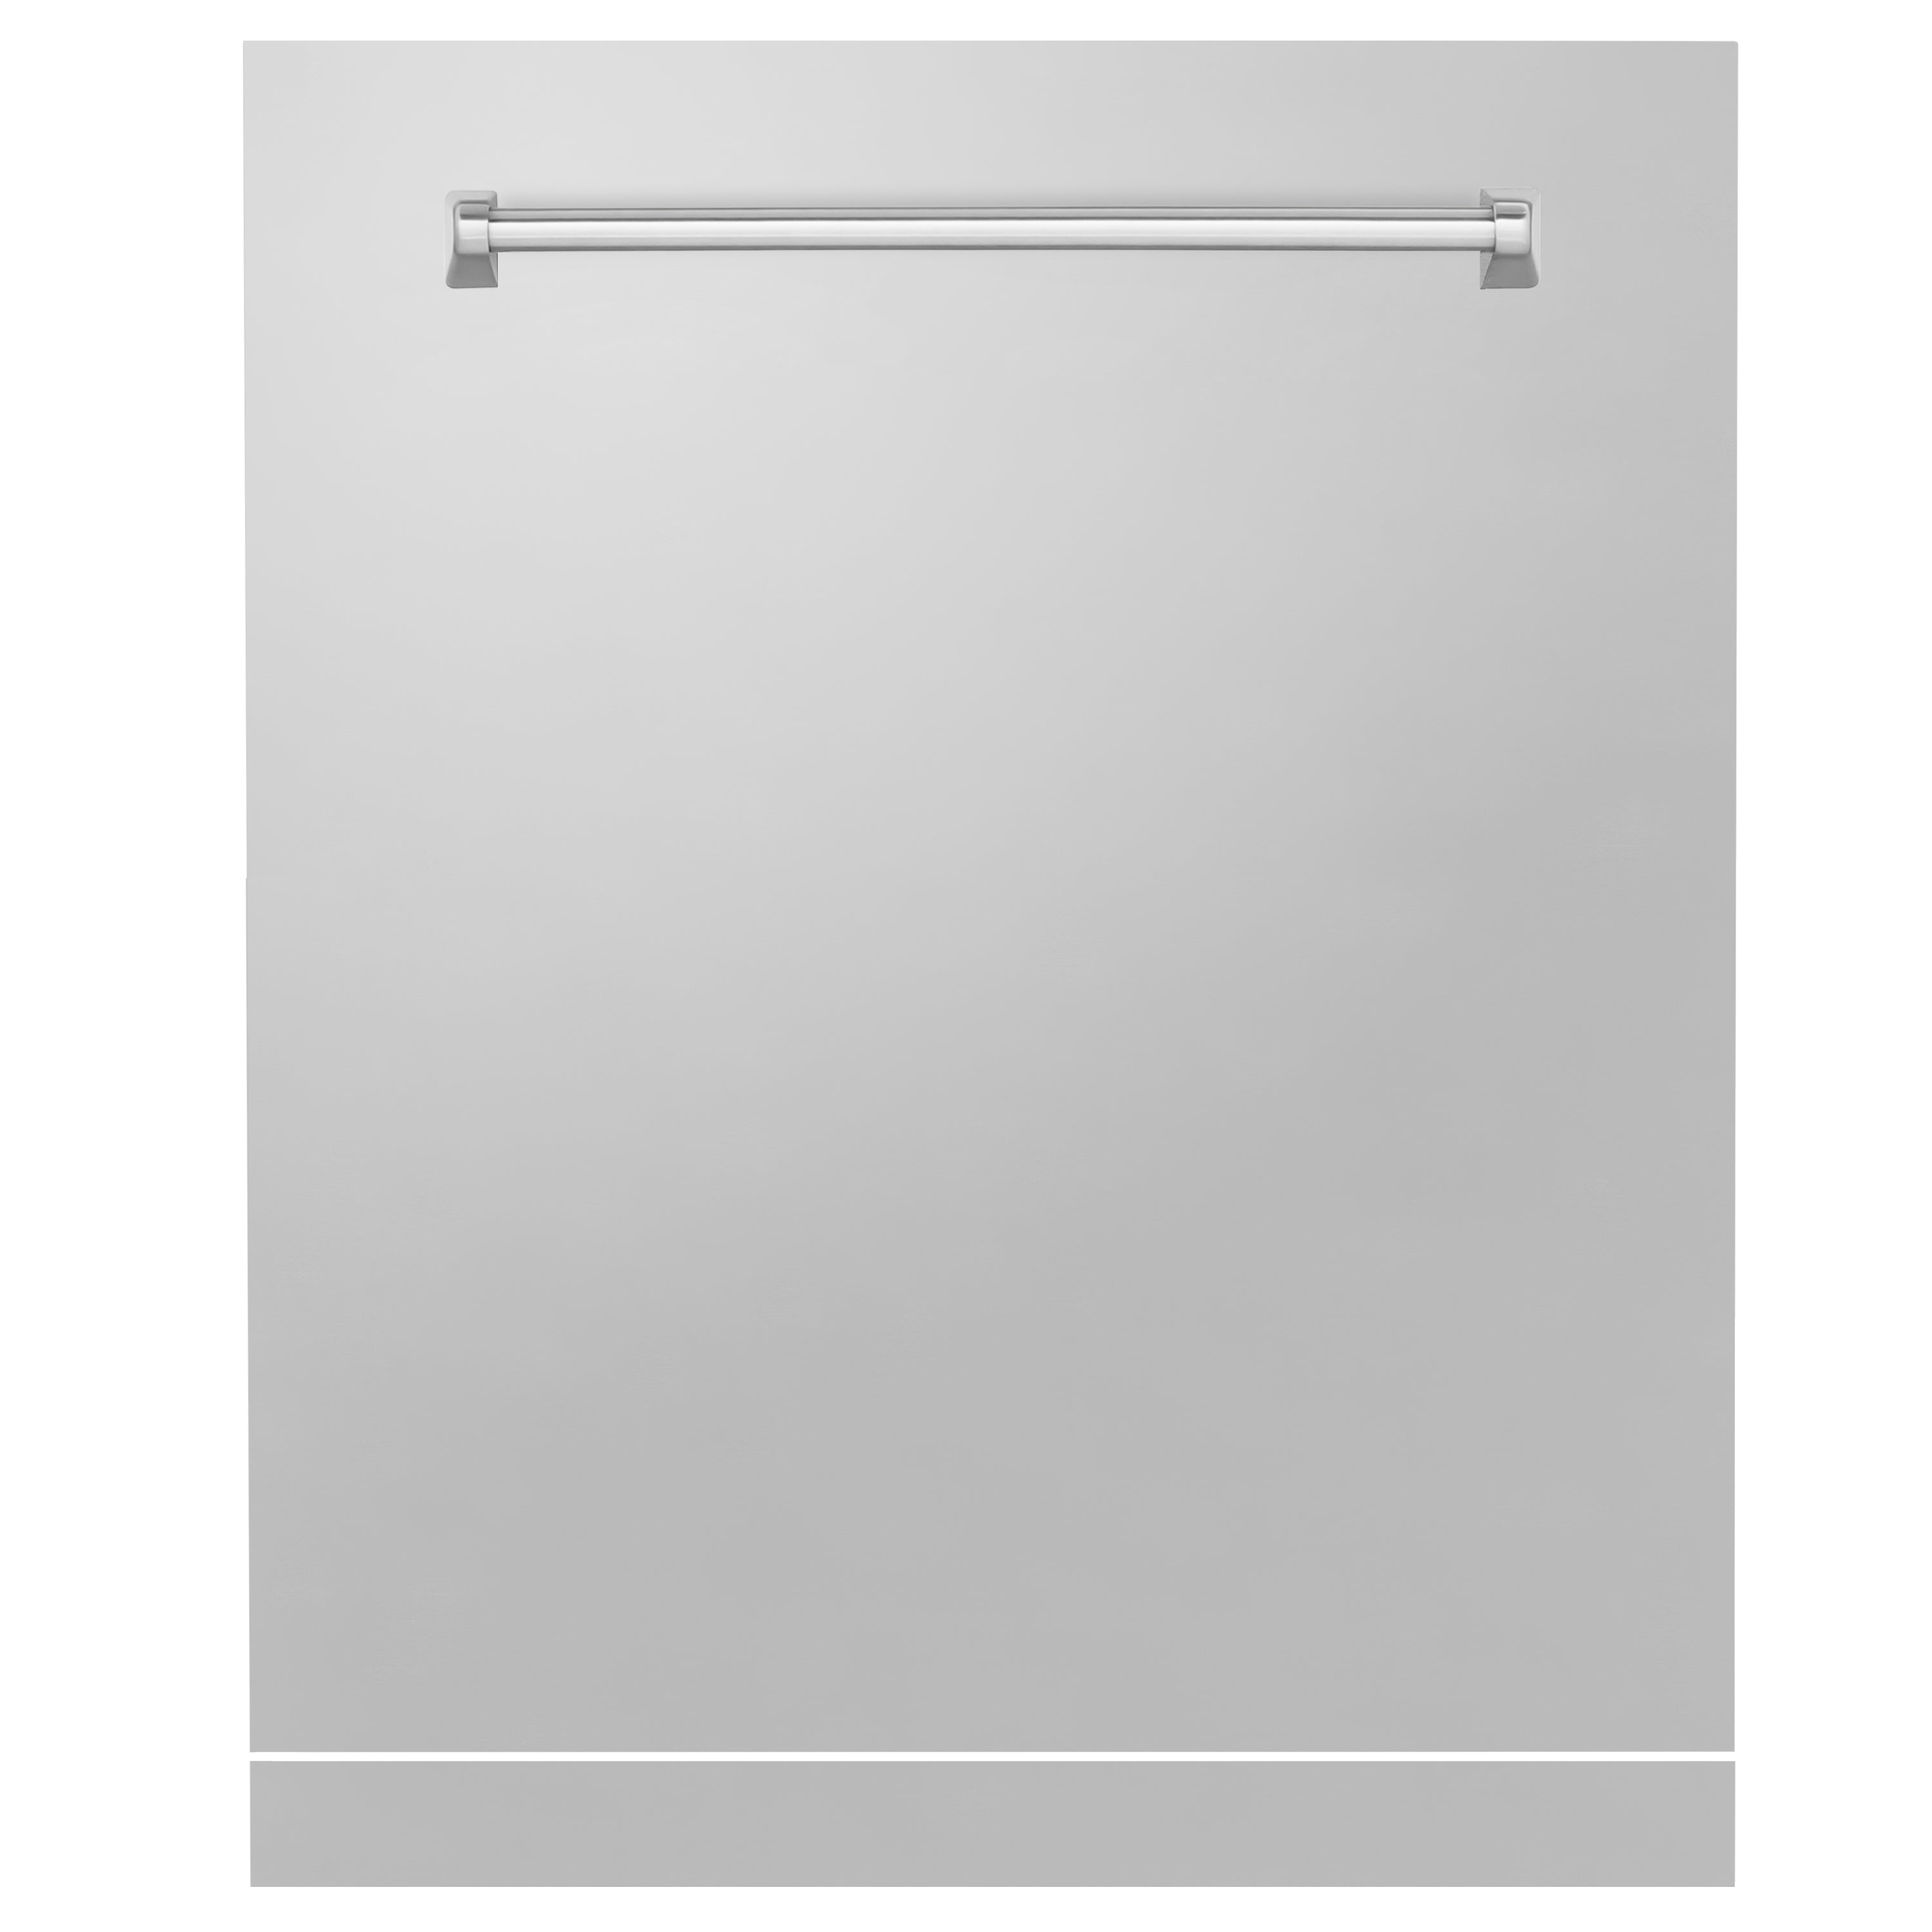 ZLINE 24" Monument Dishwasher Panel with Traditional Handle and Color Options (DPMT-24) - New Star Living